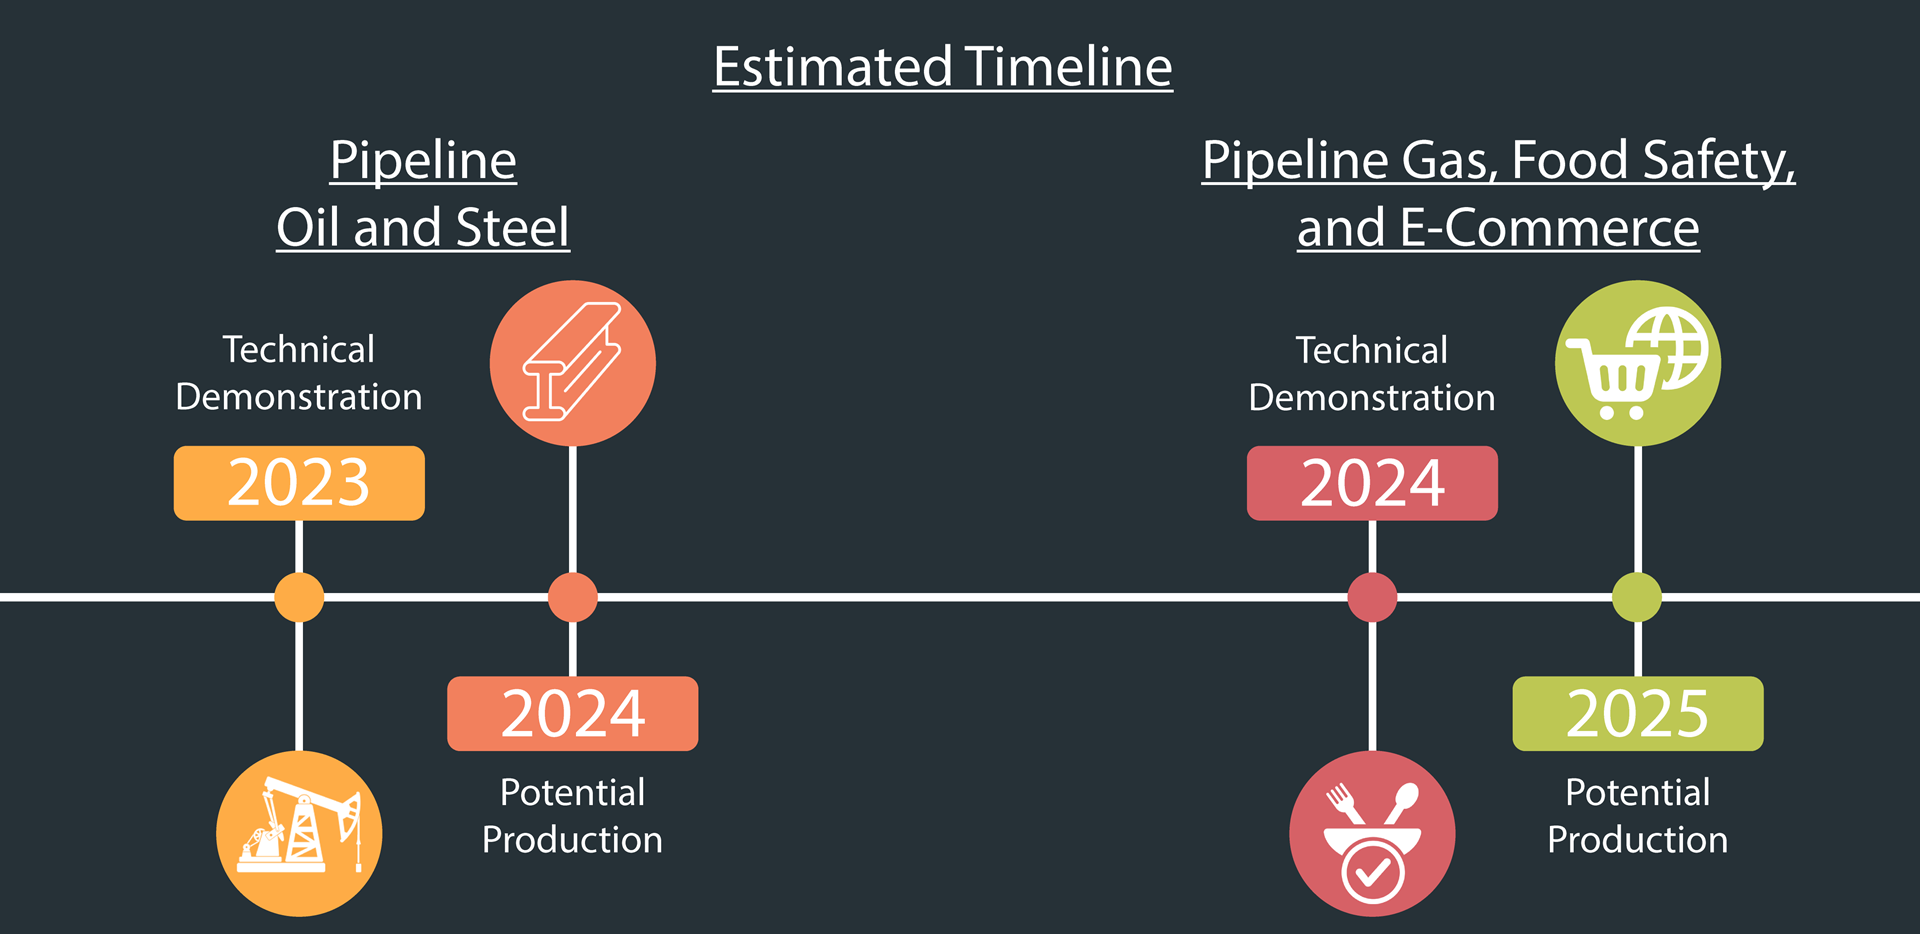 Estimated timeline Image of Pipeline Oil and Steel